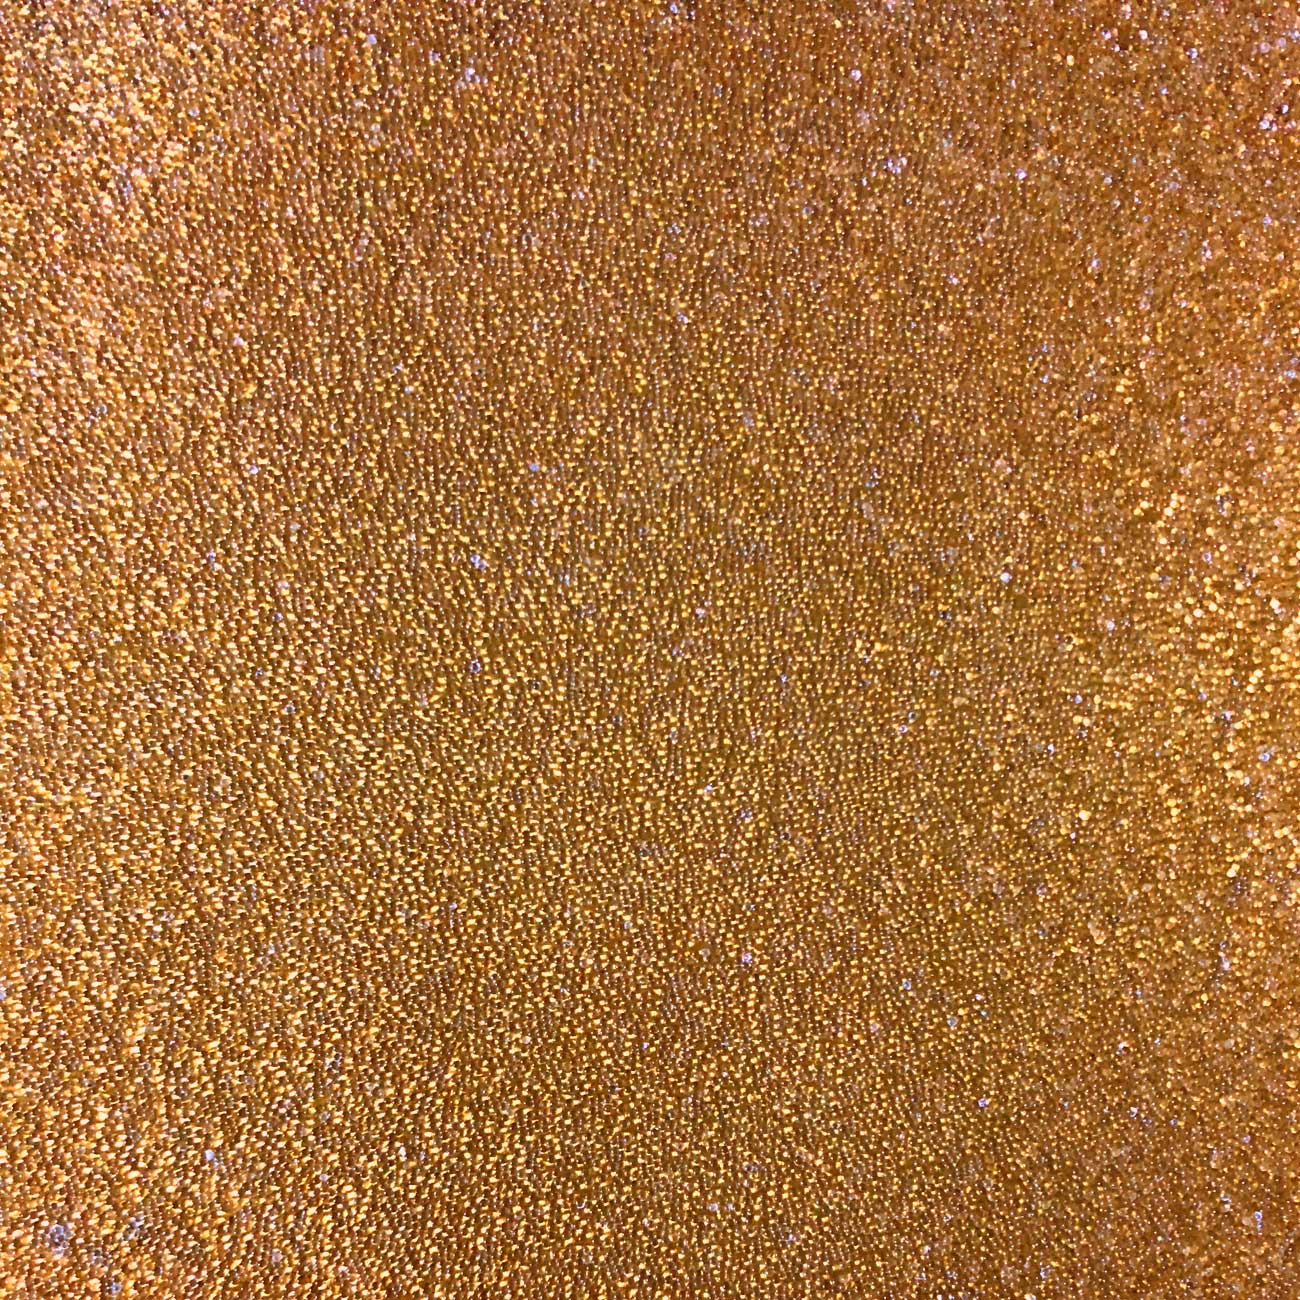 Glass bead wallcovering WallFace CBS13 CRYSTAL plain non-woven wallpaper handcrafted with real glass beads shiny golden brown 2.45 m2